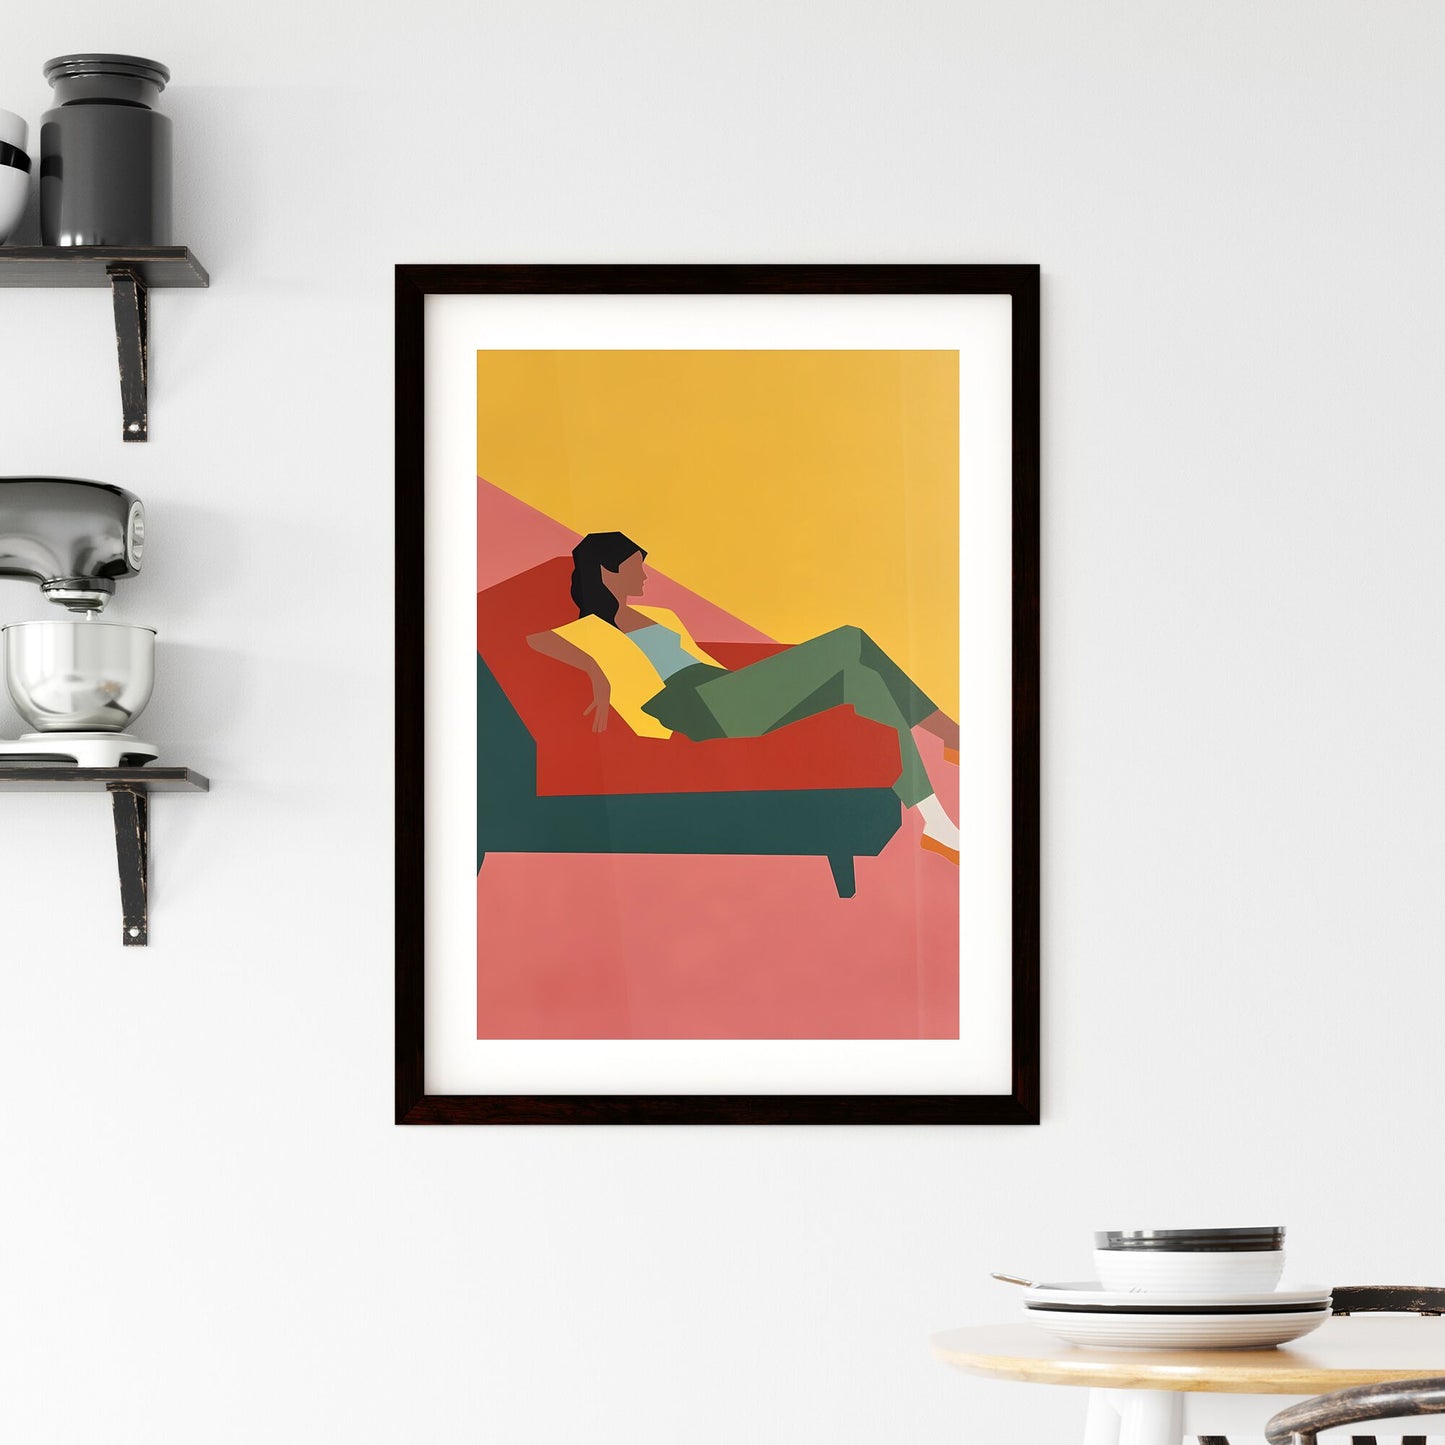 Bold Impressionist Art: Minimalistic Woman on Red Chair, Embracing Freedom and Femininity, a Canvas of Fauvist Expression Default Title